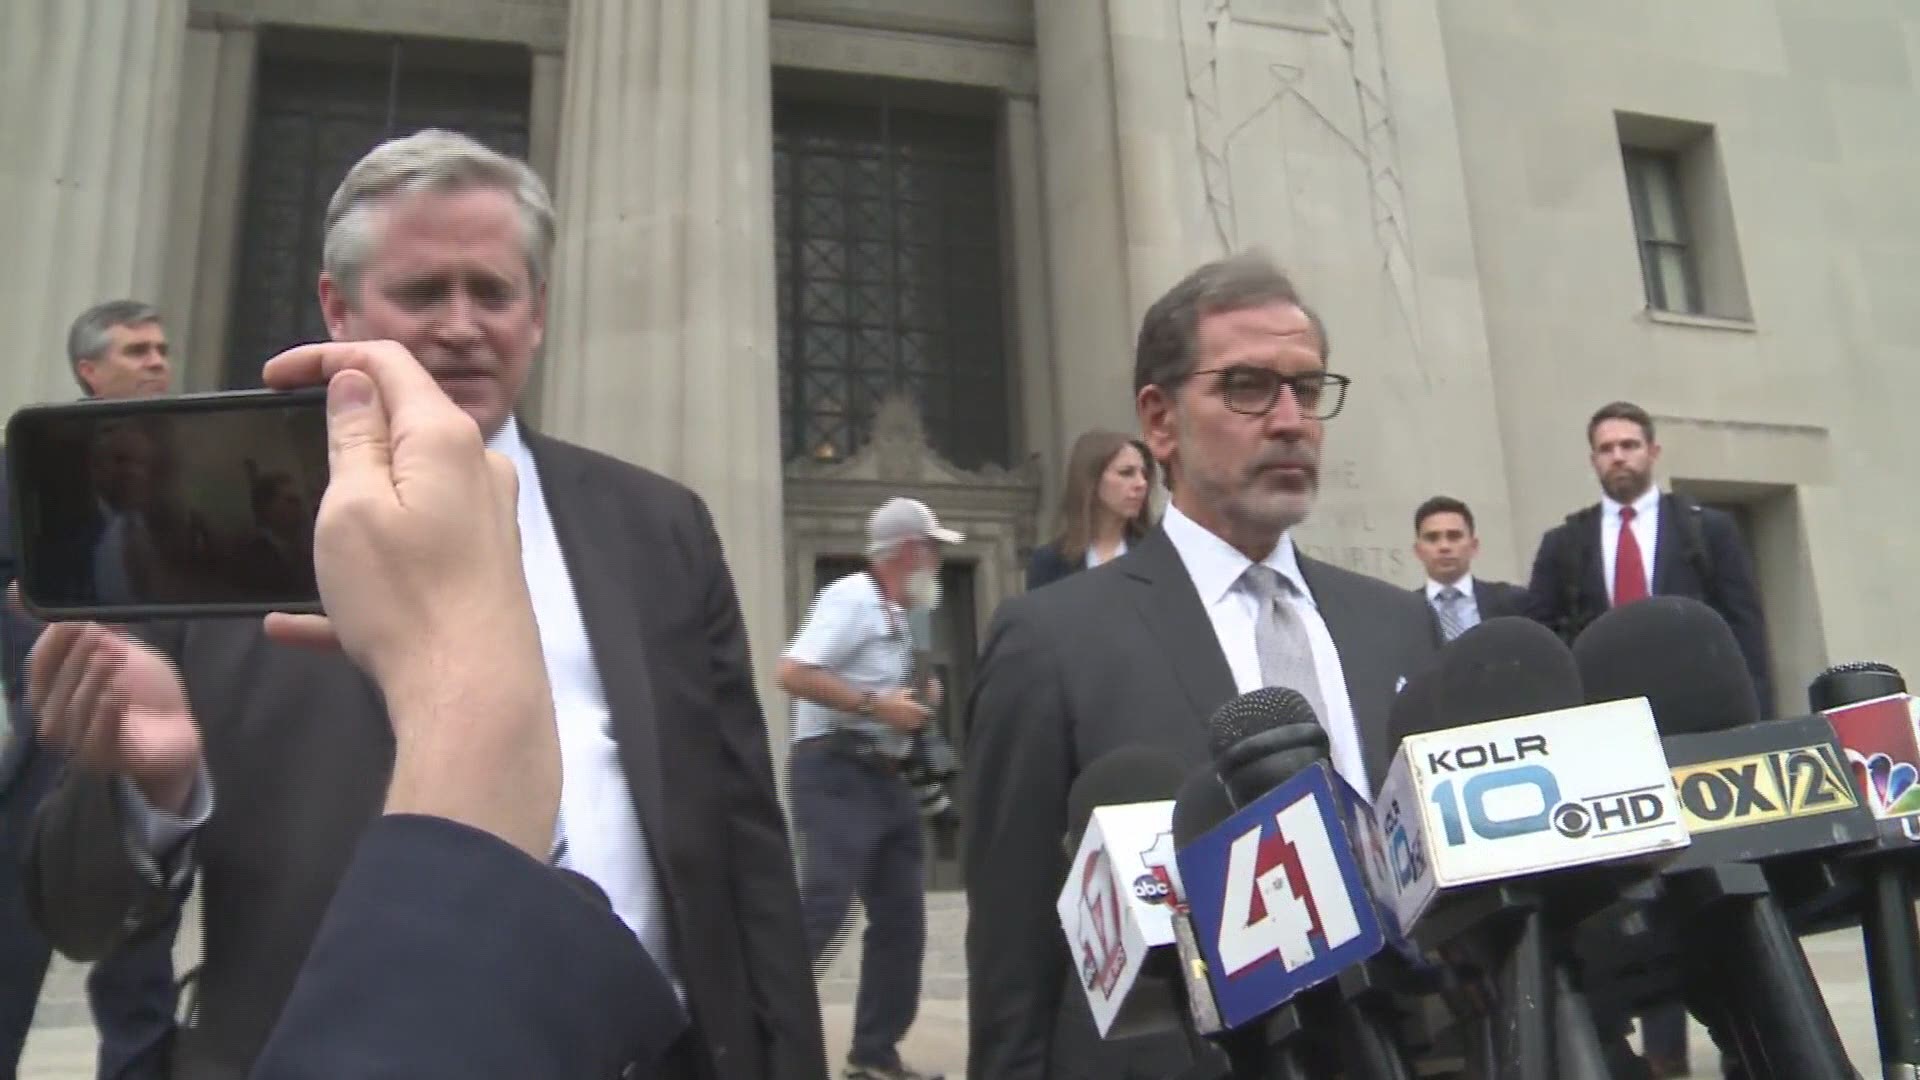 Lawyers James F. Bennett(Left), Scott Rosenblum(Center) and Edward Dowd Jr.(Right) calk about the case after the case against Gov. Greitens was dismissed.